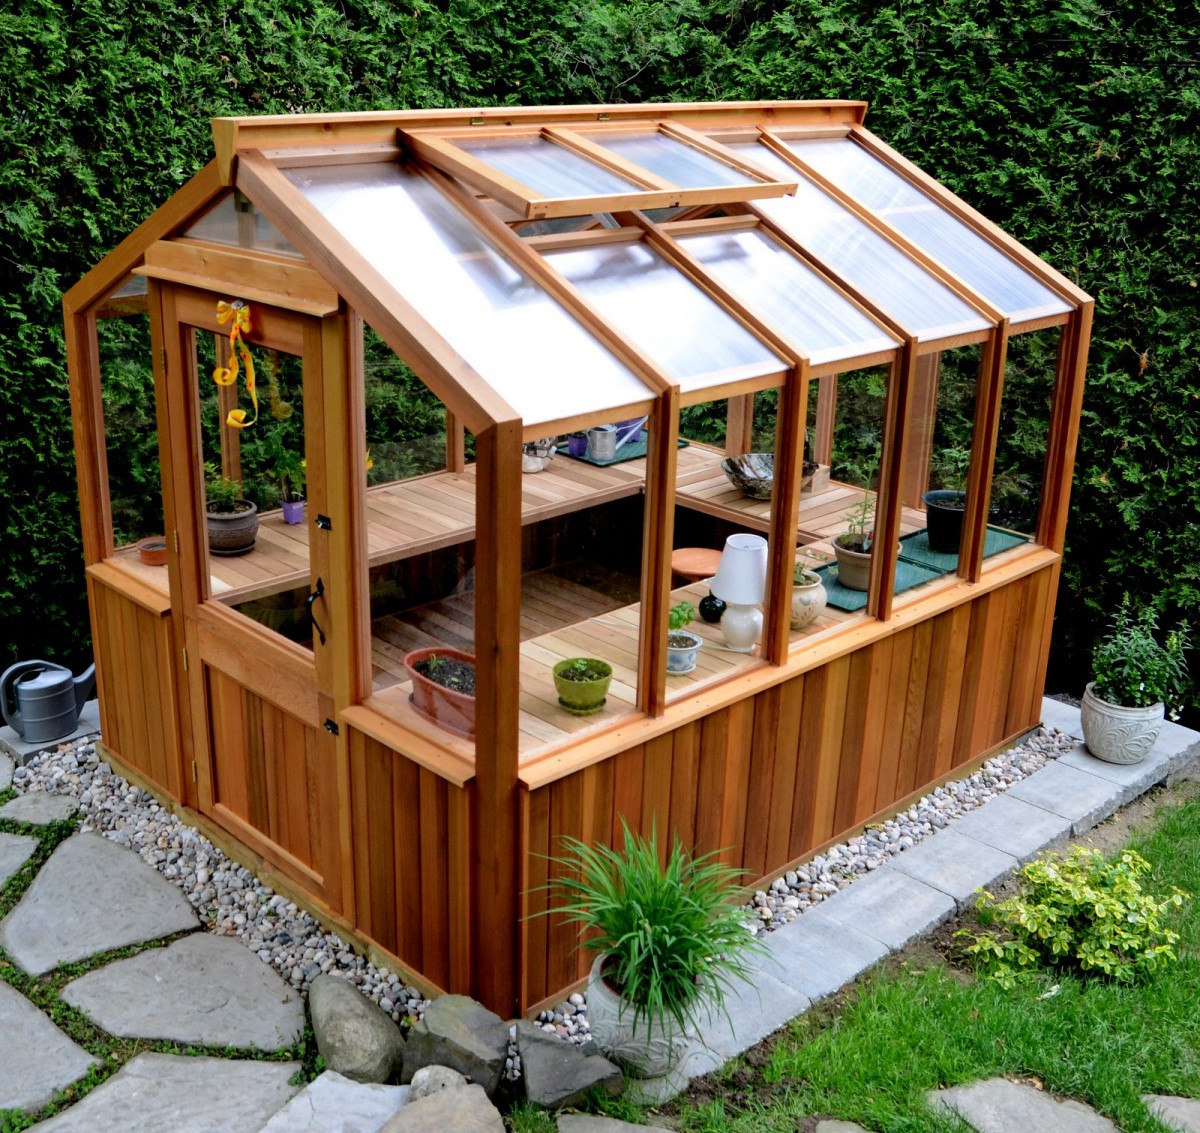 DIY Wooden Greenhouse
 Greenhouse SHE Shed 22 Awesome DIY Kit Ideas